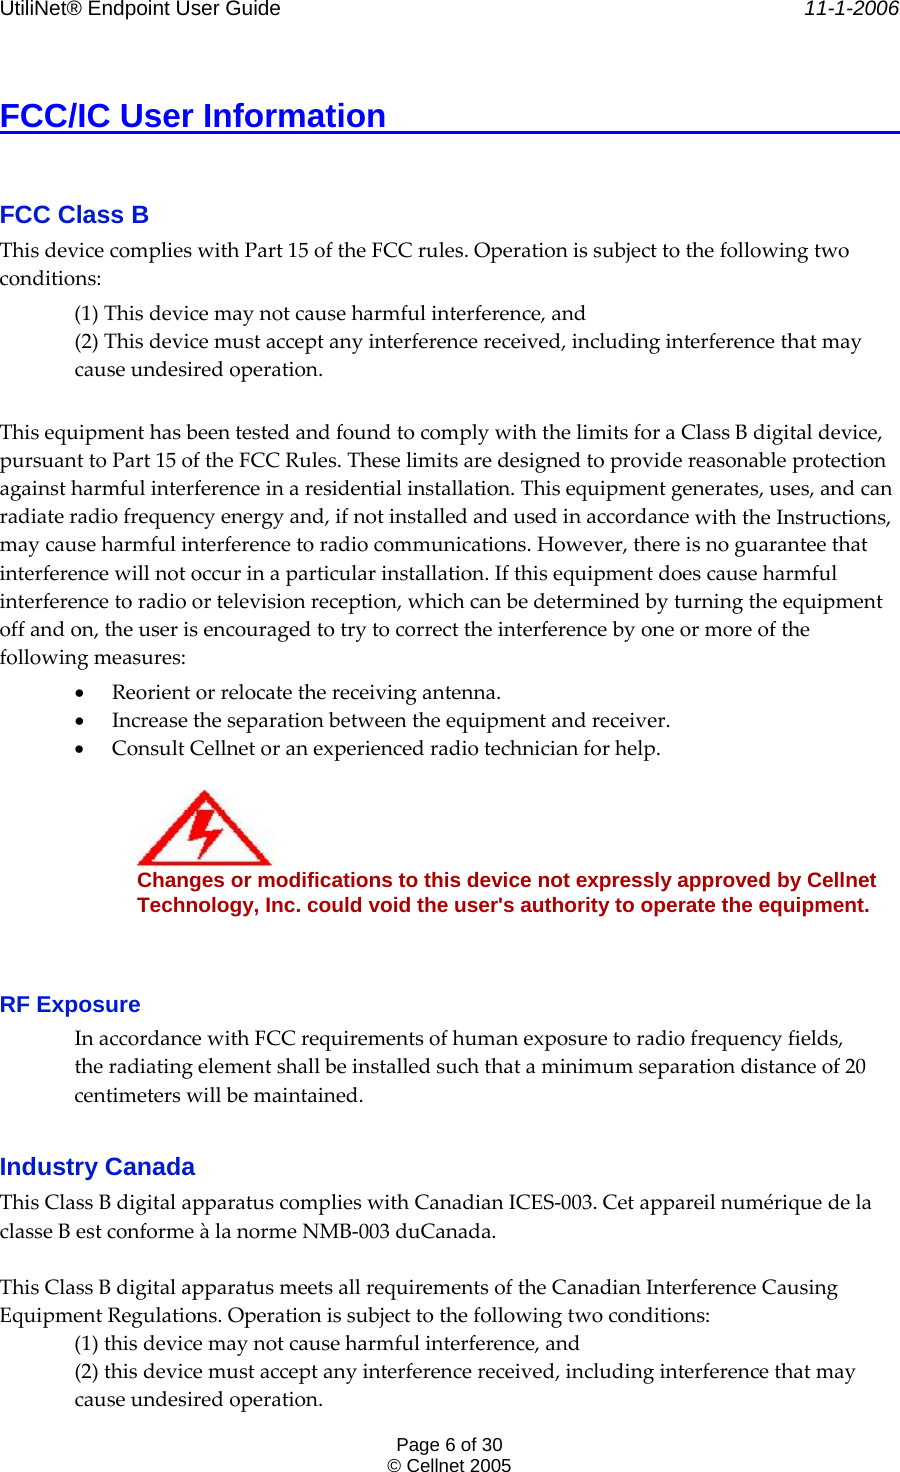 UtiliNet® Endpoint User Guide    11-1-2006 Page 6 of 30 © Cellnet 2005  FCC/IC User Information          FCC Class B  ThisdevicecomplieswithPart15oftheFCCrules.Operationissubjecttothefollowingtwoconditions:(1)Thisdevicemaynotcauseharmfulinterference,and(2)Thisdevicemustacceptanyinterferencereceived,includinginterferencethatmaycauseundesiredoperation.ThisequipmenthasbeentestedandfoundtocomplywiththelimitsforaClassBdigitaldevice,pursuanttoPart15oftheFCCRules.Theselimitsaredesignedtoprovidereasonableprotectionagainstharmfulinterferenceinaresidentialinstallation.Thisequipmentgenerates,uses,andcanradiateradiofrequencyenergyand,ifnotinstalledandusedinaccordancewiththeInstructions,maycauseharmfulinterferencetoradiocommunications.However,thereisnoguaranteethatinterferencewillnotoccurinaparticularinstallation.Ifthisequipmentdoescauseharmfulinterferencetoradioortelevisionreception,whichcanbedeterminedbyturningtheequipmentoffandon,theuserisencouragedtotrytocorrecttheinterferencebyoneormoreofthefollowingmeasures:• Reorientorrelocatethereceivingantenna.• Increasetheseparationbetweentheequipmentandreceiver.• ConsultCellnetoranexperiencedradiotechnicianforhelp.Changes or modifications to this device not expressly approved by Cellnet  Technology, Inc. could void the user&apos;s authority to operate the equipment.  RF Exposure  InaccordancewithFCCrequirementsofhumanexposuretoradiofrequencyfields,theradiatingelementshallbeinstalledsuchthataminimumseparationdistanceof20centimeterswillbemaintained. Industry Canada  ThisClassBdigitalapparatuscomplieswithCanadianICES‐003.CetappareilnumériquedelaclasseBestconformeàlanormeNMB‐003duCanada.ThisClassBdigitalapparatusmeetsallrequirementsoftheCanadianInterferenceCausingEquipmentRegulations.Operationissubjecttothefollowingtwoconditions:(1)thisdevicemaynotcauseharmfulinterference,and(2)thisdevicemustacceptanyinterferencereceived,includinginterferencethatmaycauseundesiredoperation.